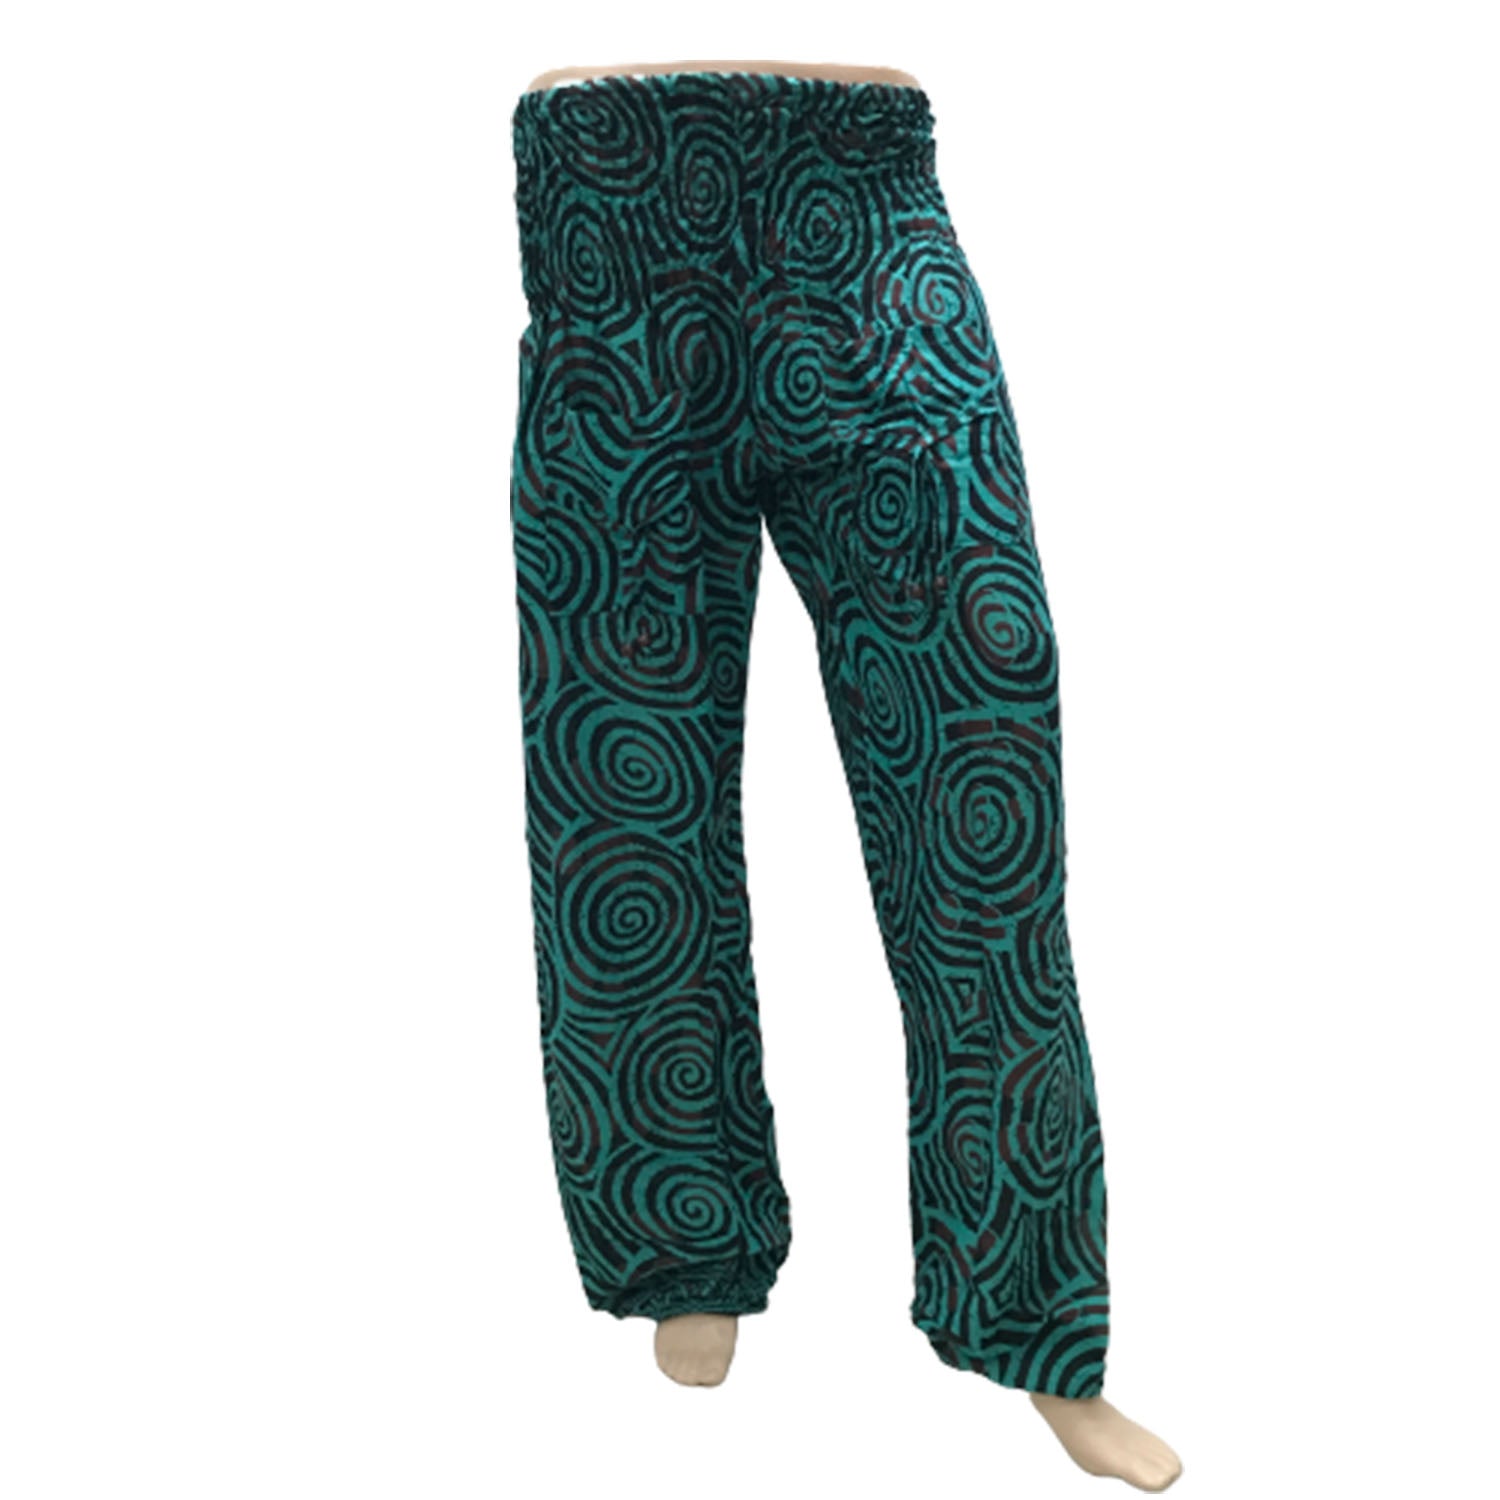 Ganesha Handicrafts Cuffed Casual Trousers, Trousers, Black & Green Trousers, Cuffed Trousers, Casual Trousers